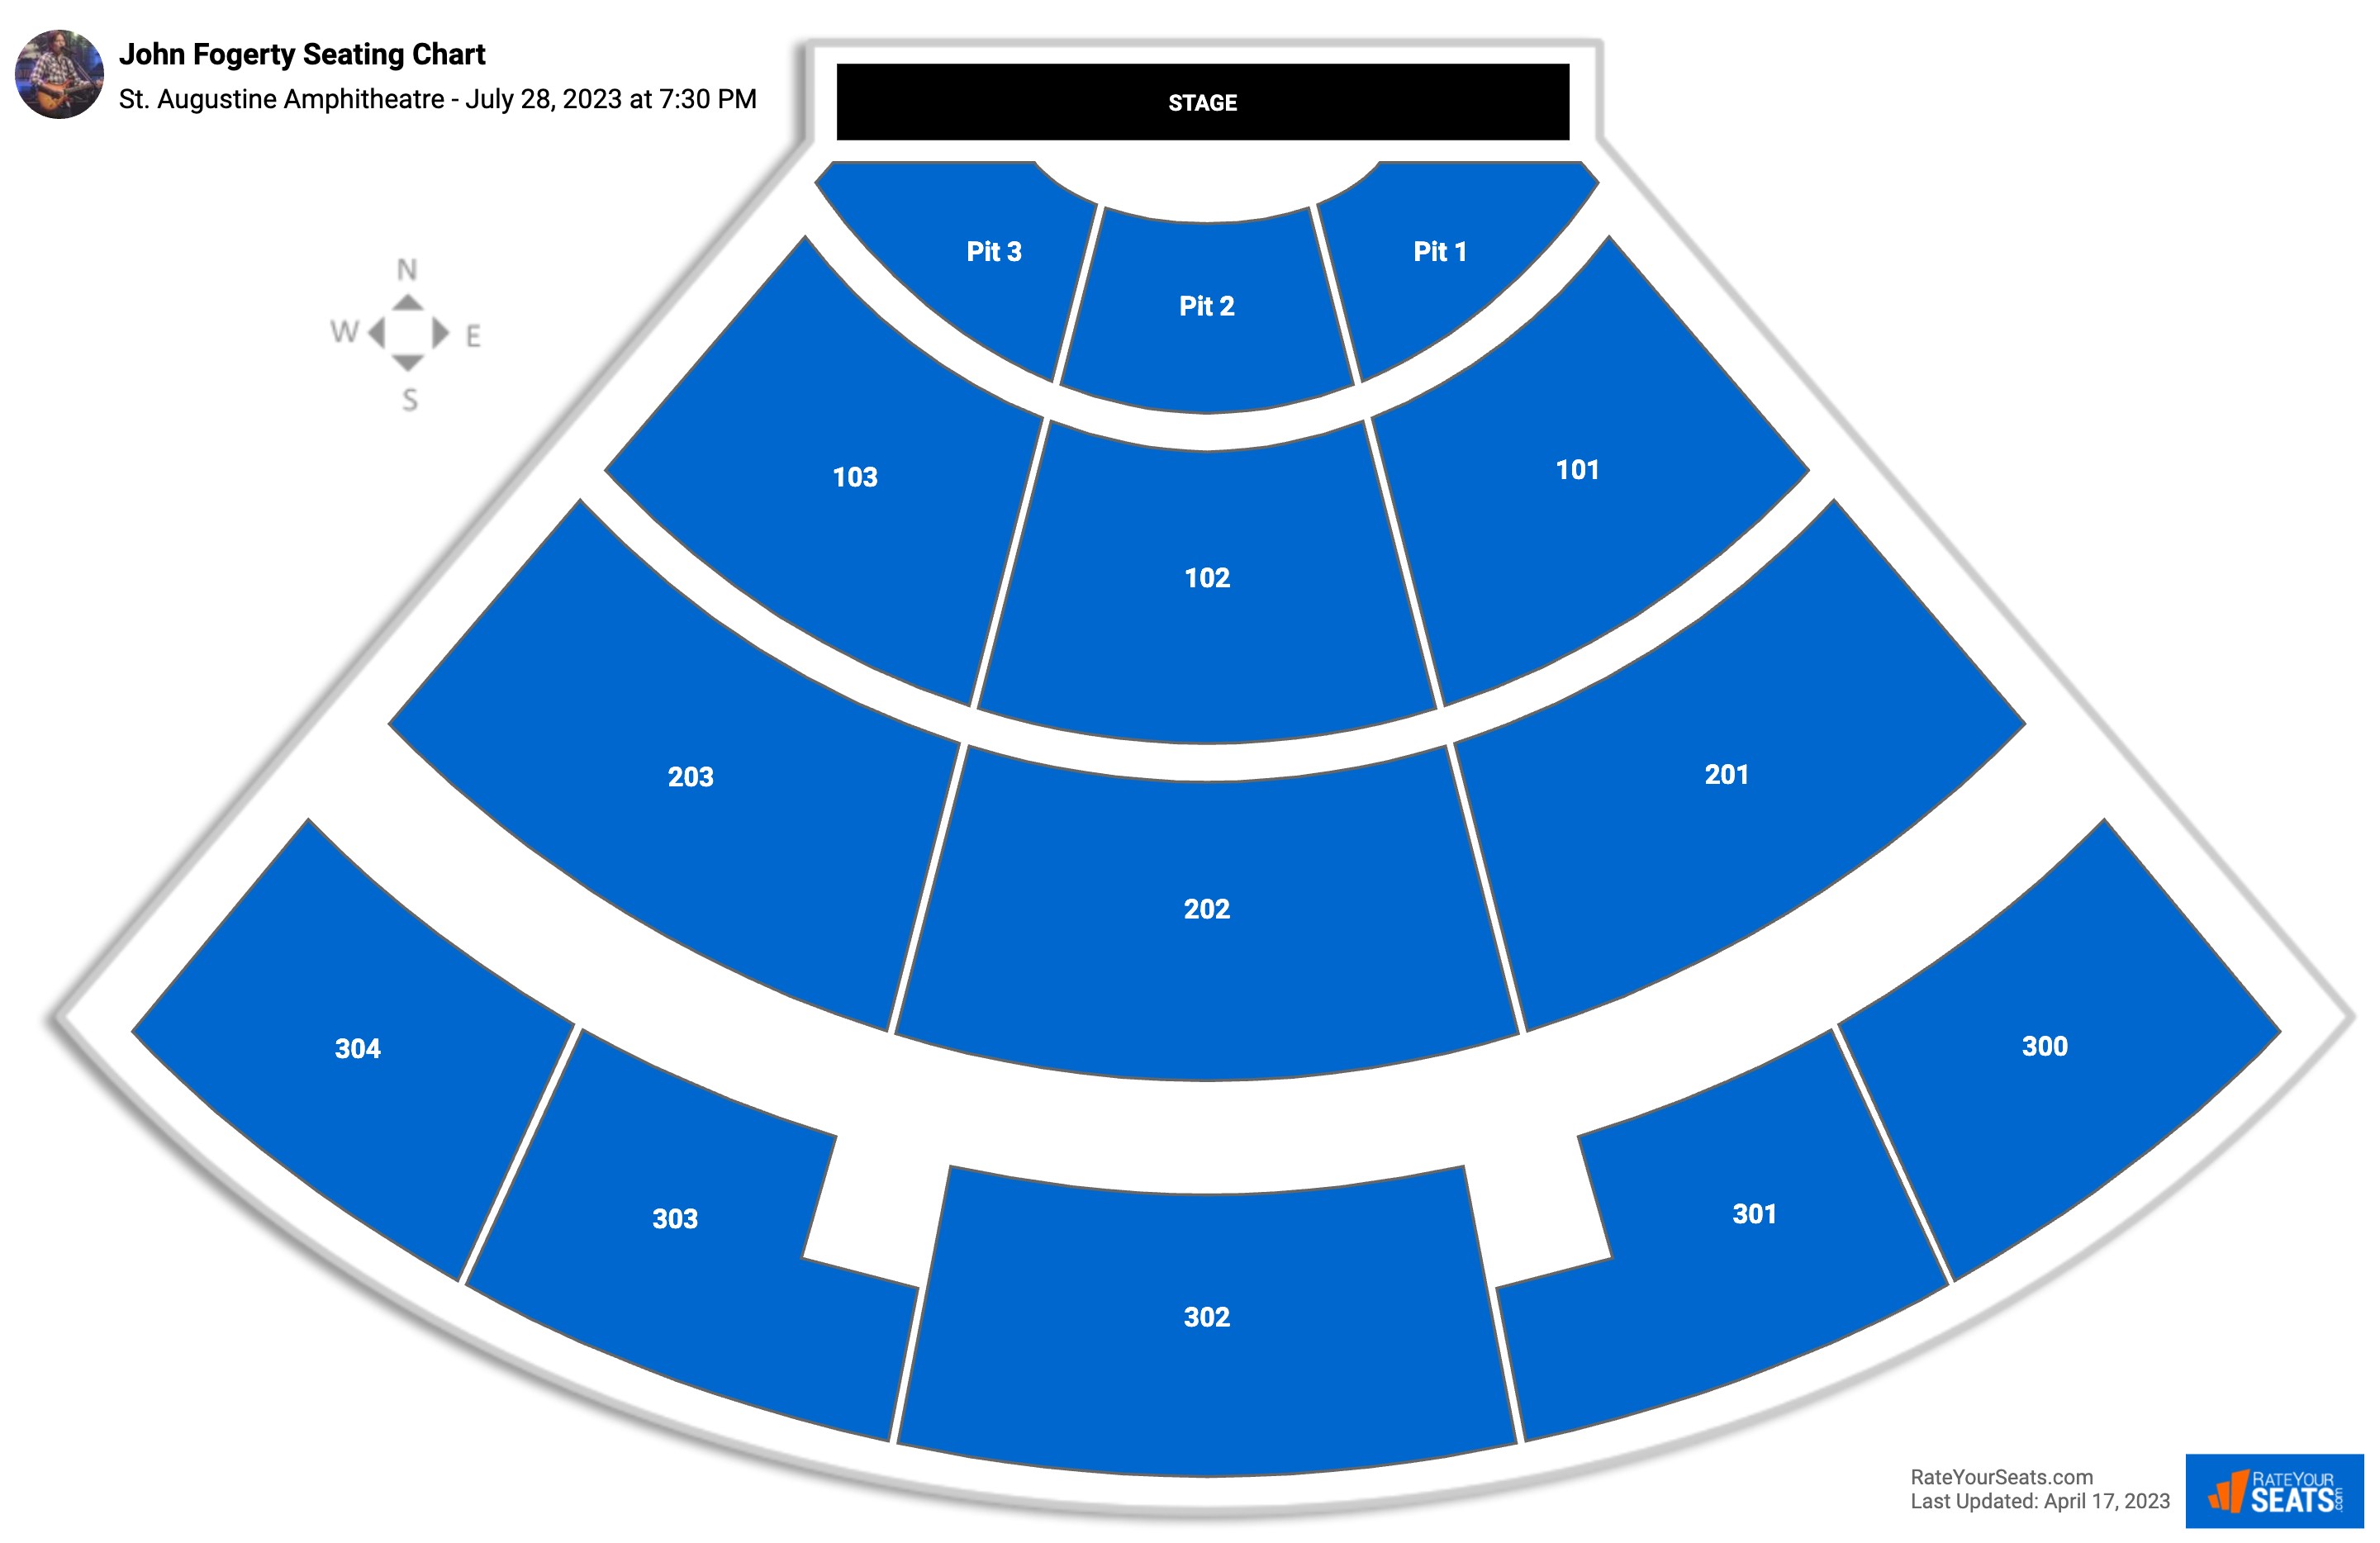 St. Augustine Amphitheatre Seating Chart - RateYourSeats.com